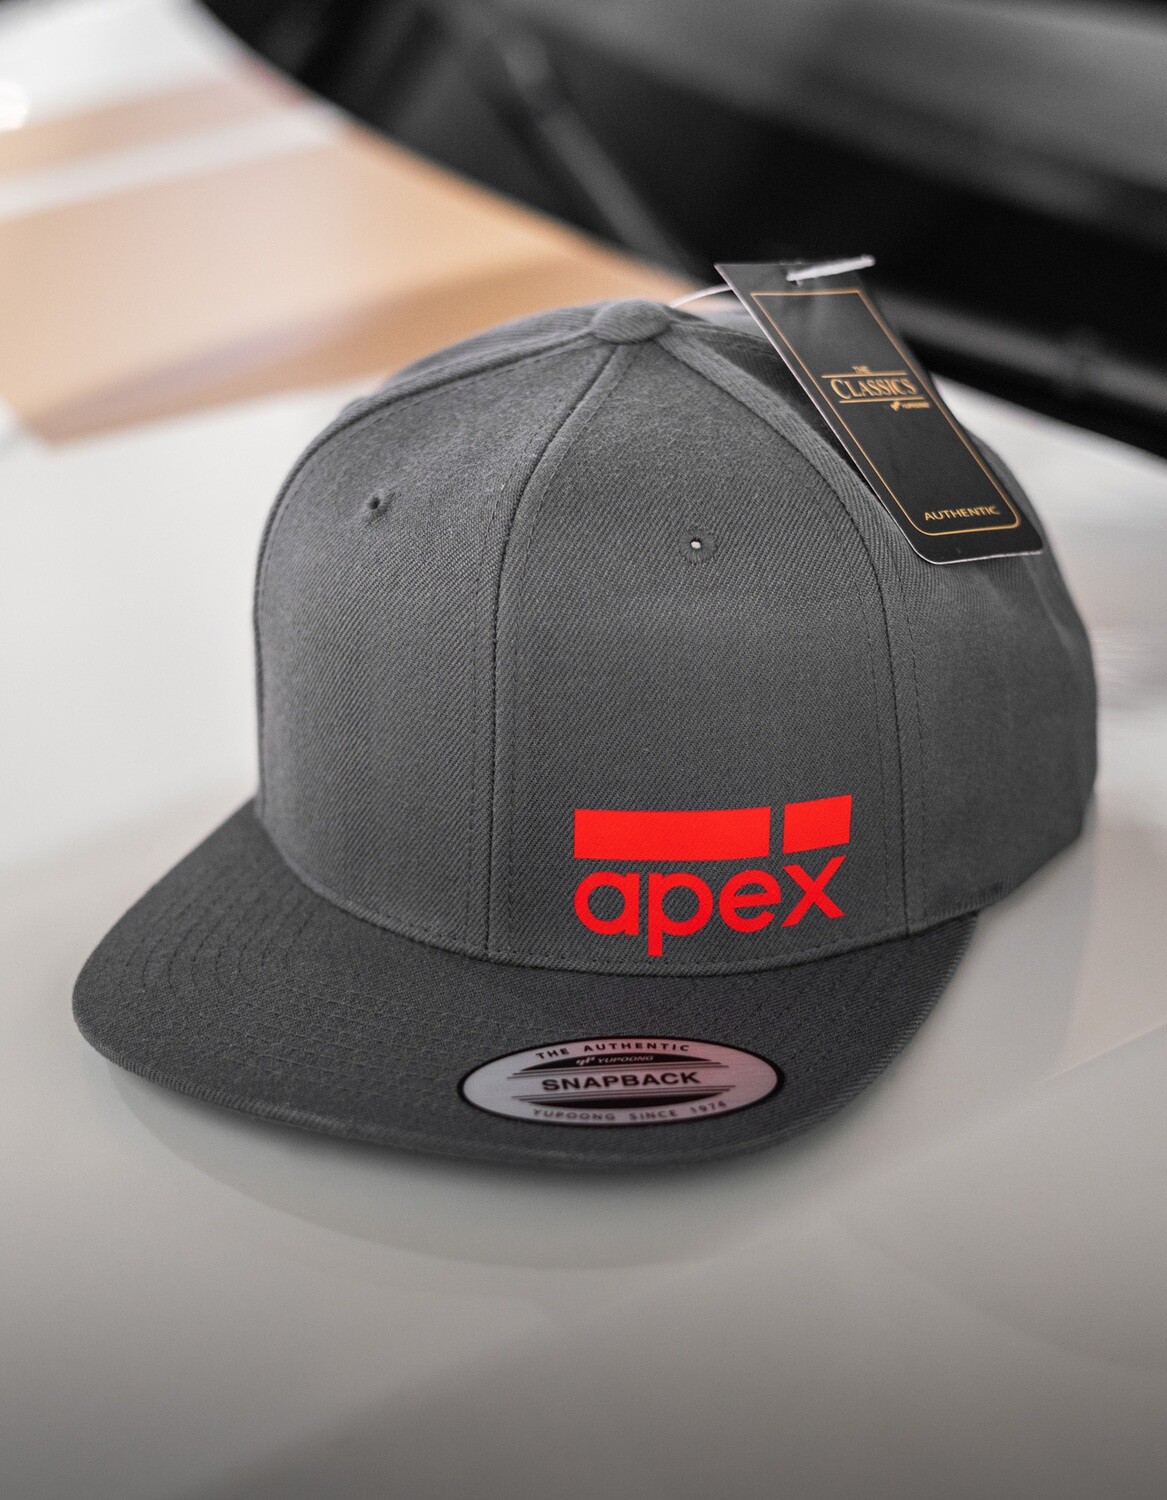 Classic curved Snapback